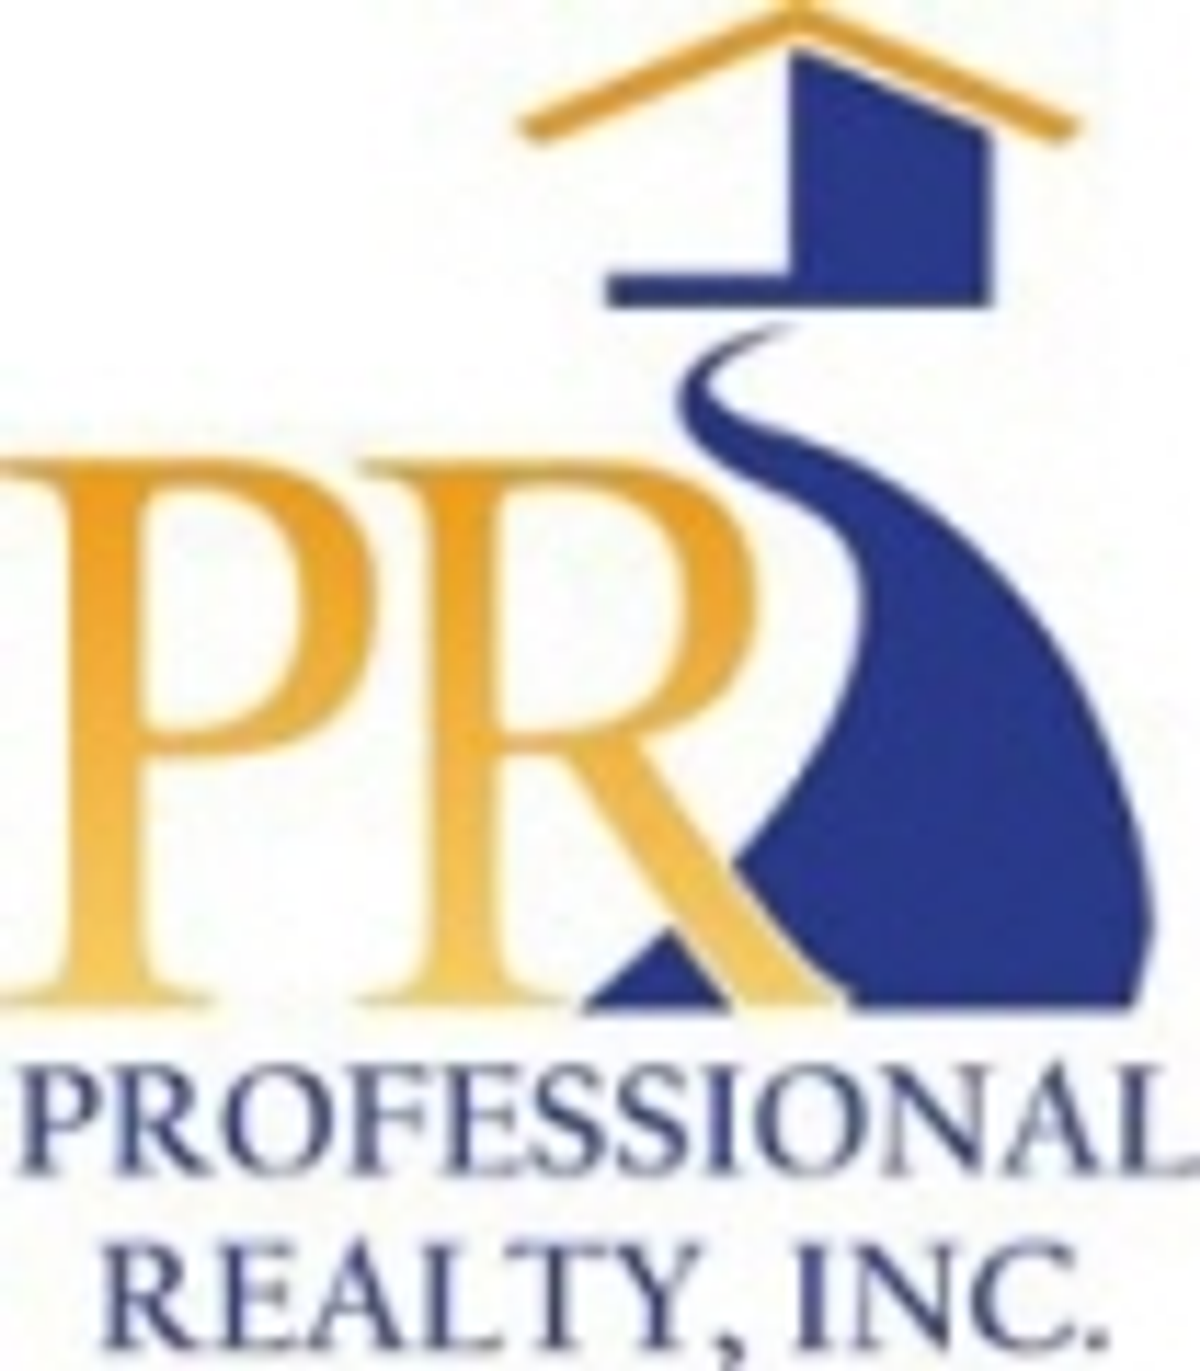 Photo for Dave Stoddart, Listing Agent at Professional Realty, Inc.